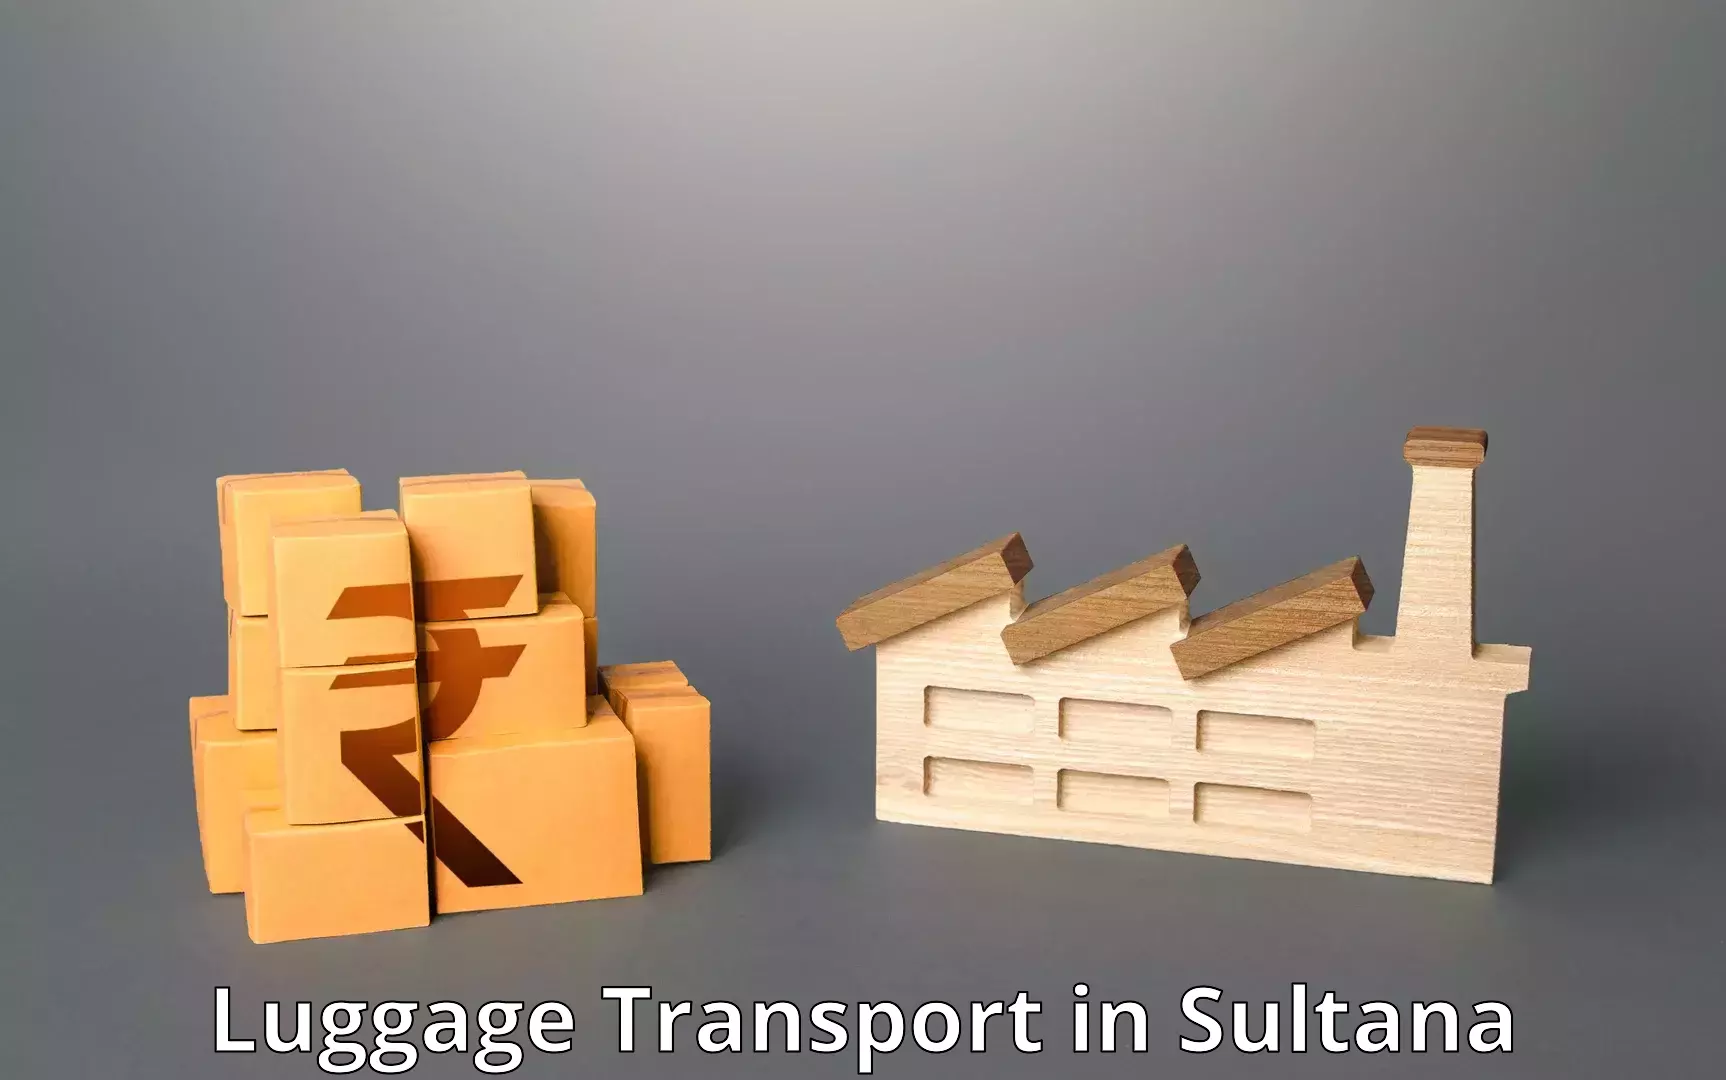 Baggage transport network in Sultana